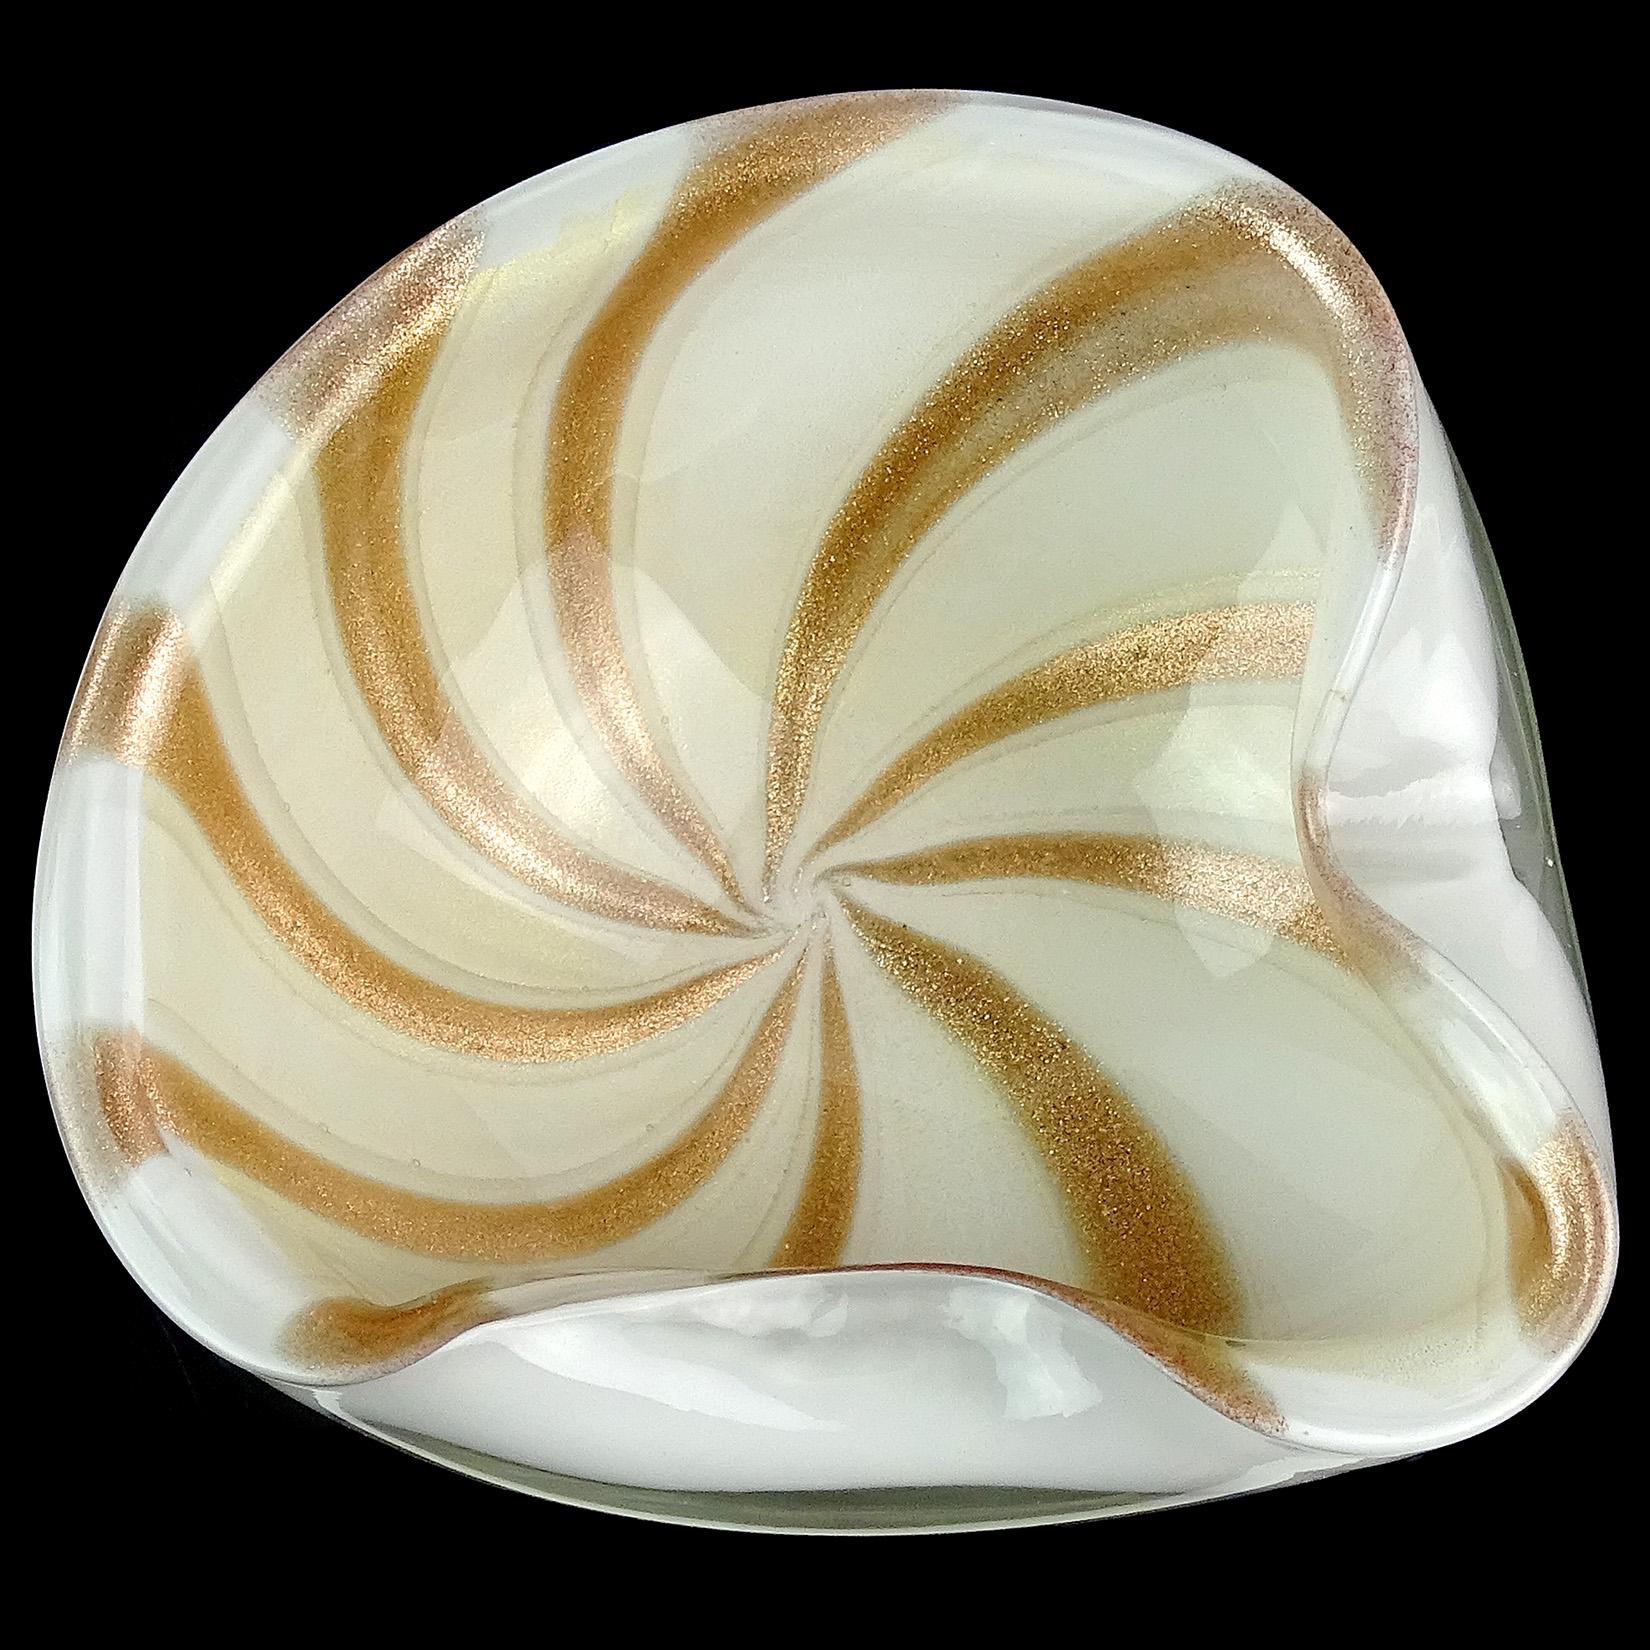 Beautiful vintage Murano hand blown white, gold and aventurine flecks Italian art glass bowl with stripe design. Documented to designer Alfredo Barbini, circa 1950-1960s. The piece glitters in the light. Has a decorative folded rim. Can be used as a